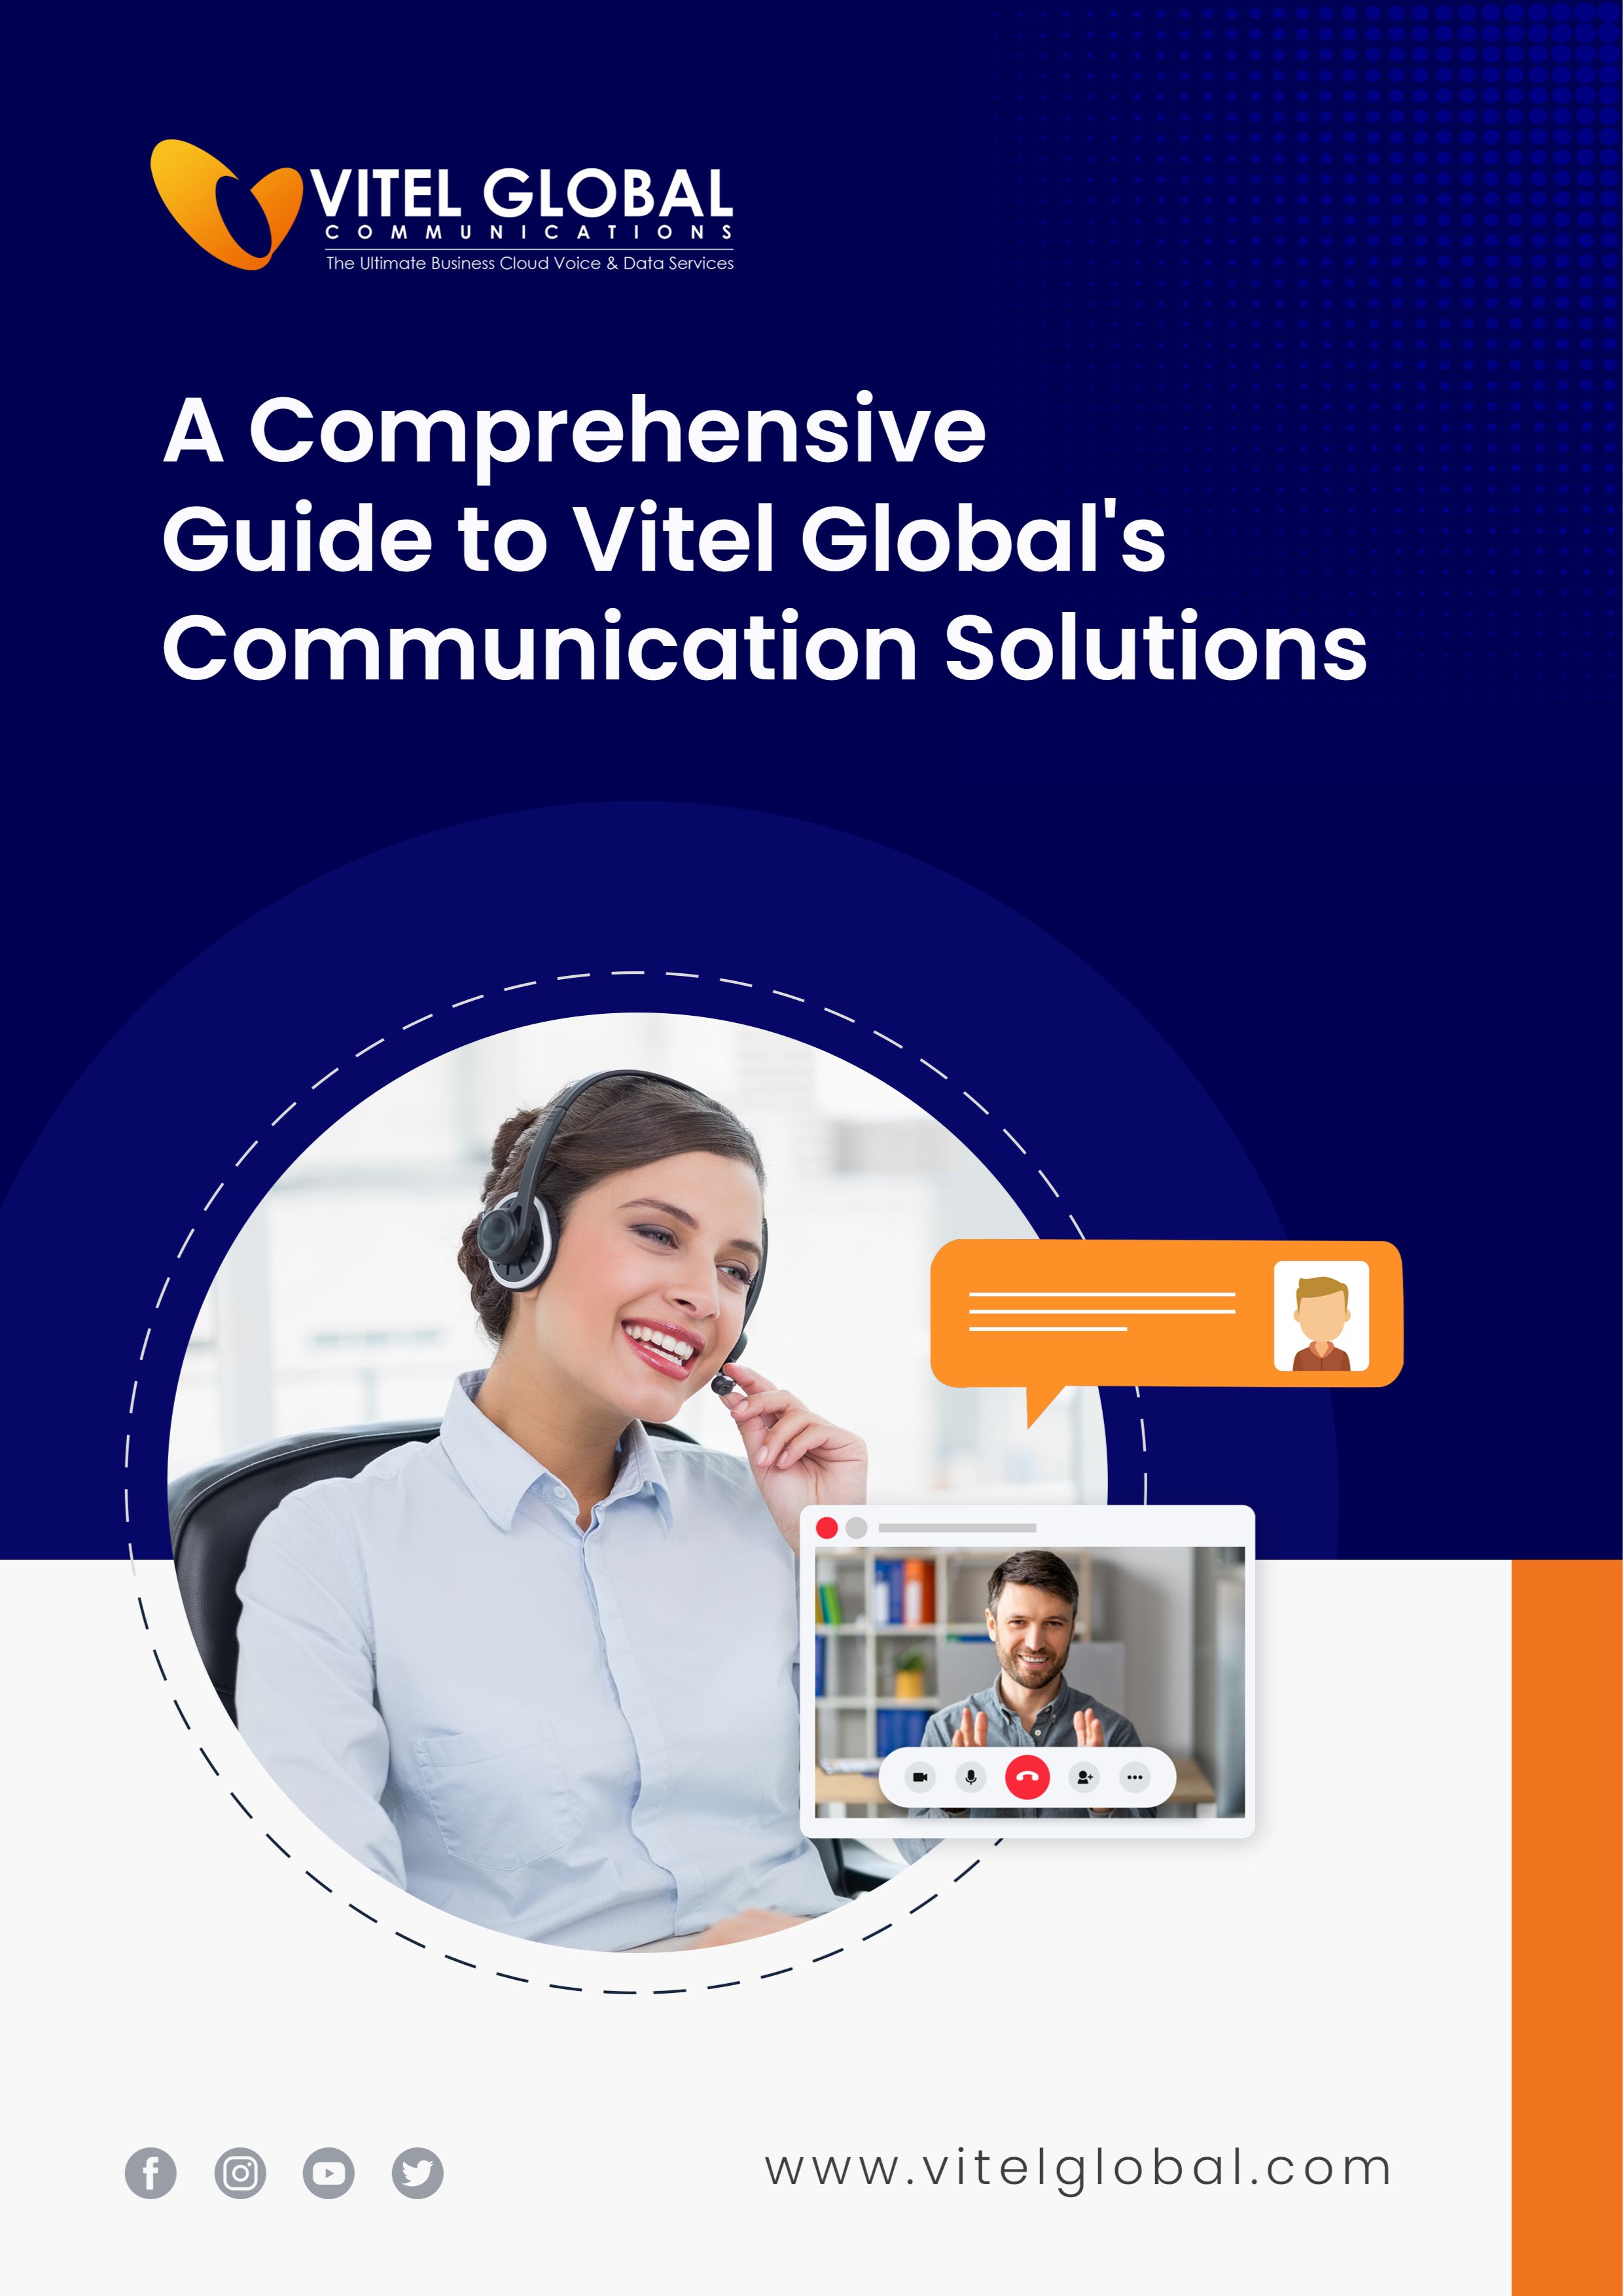 A Comprehensive Guide to Vitel Global's Communication